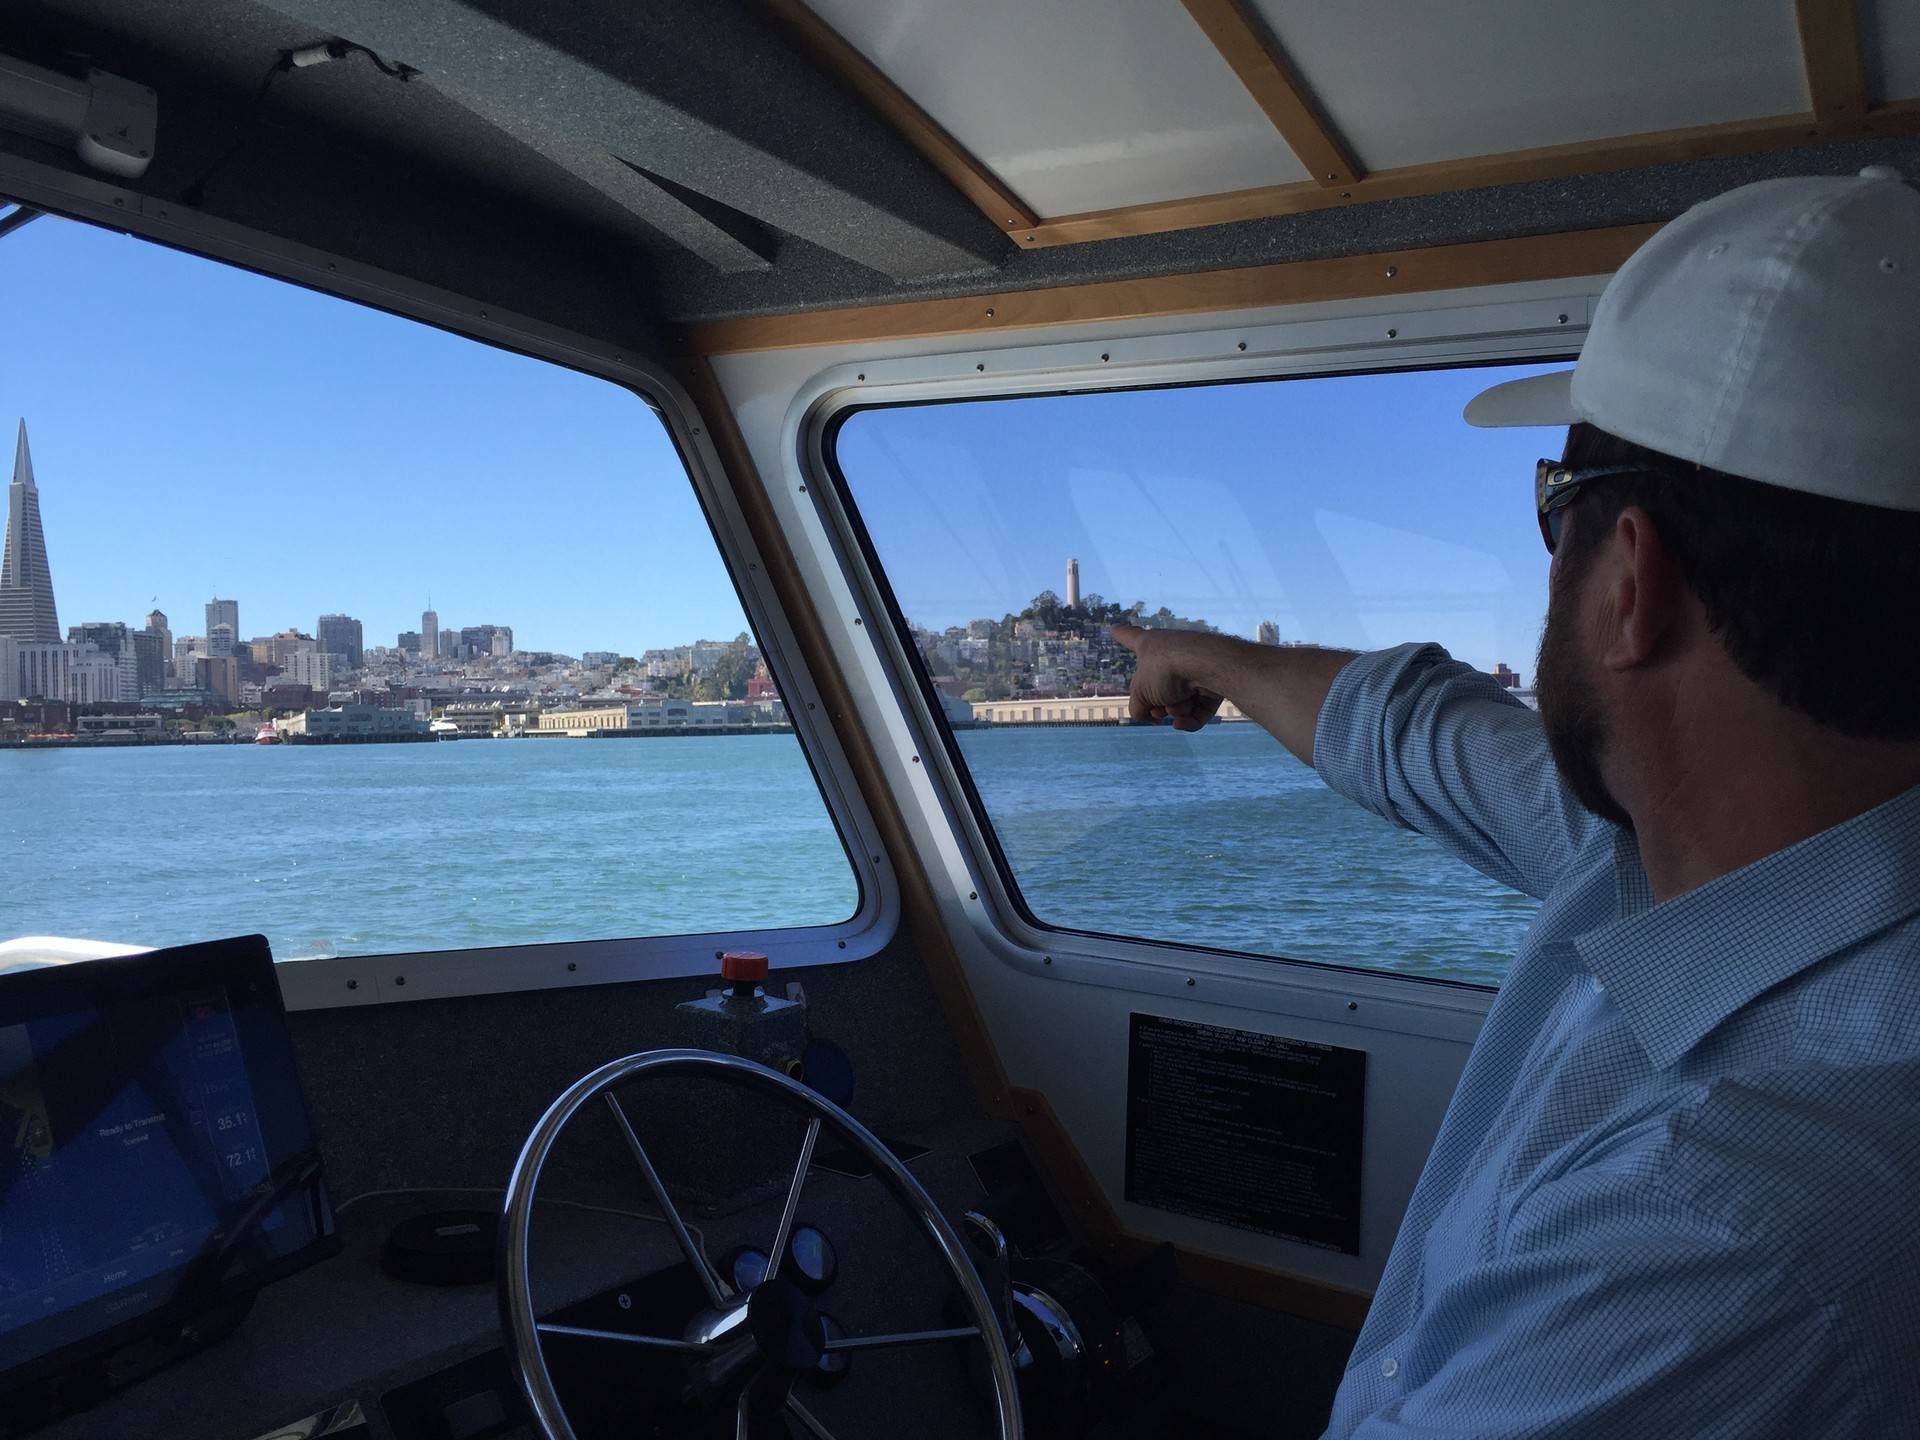 James Jaber is the head of Prop SF, a private company which ferries workers from San Francisco to Redwood City.